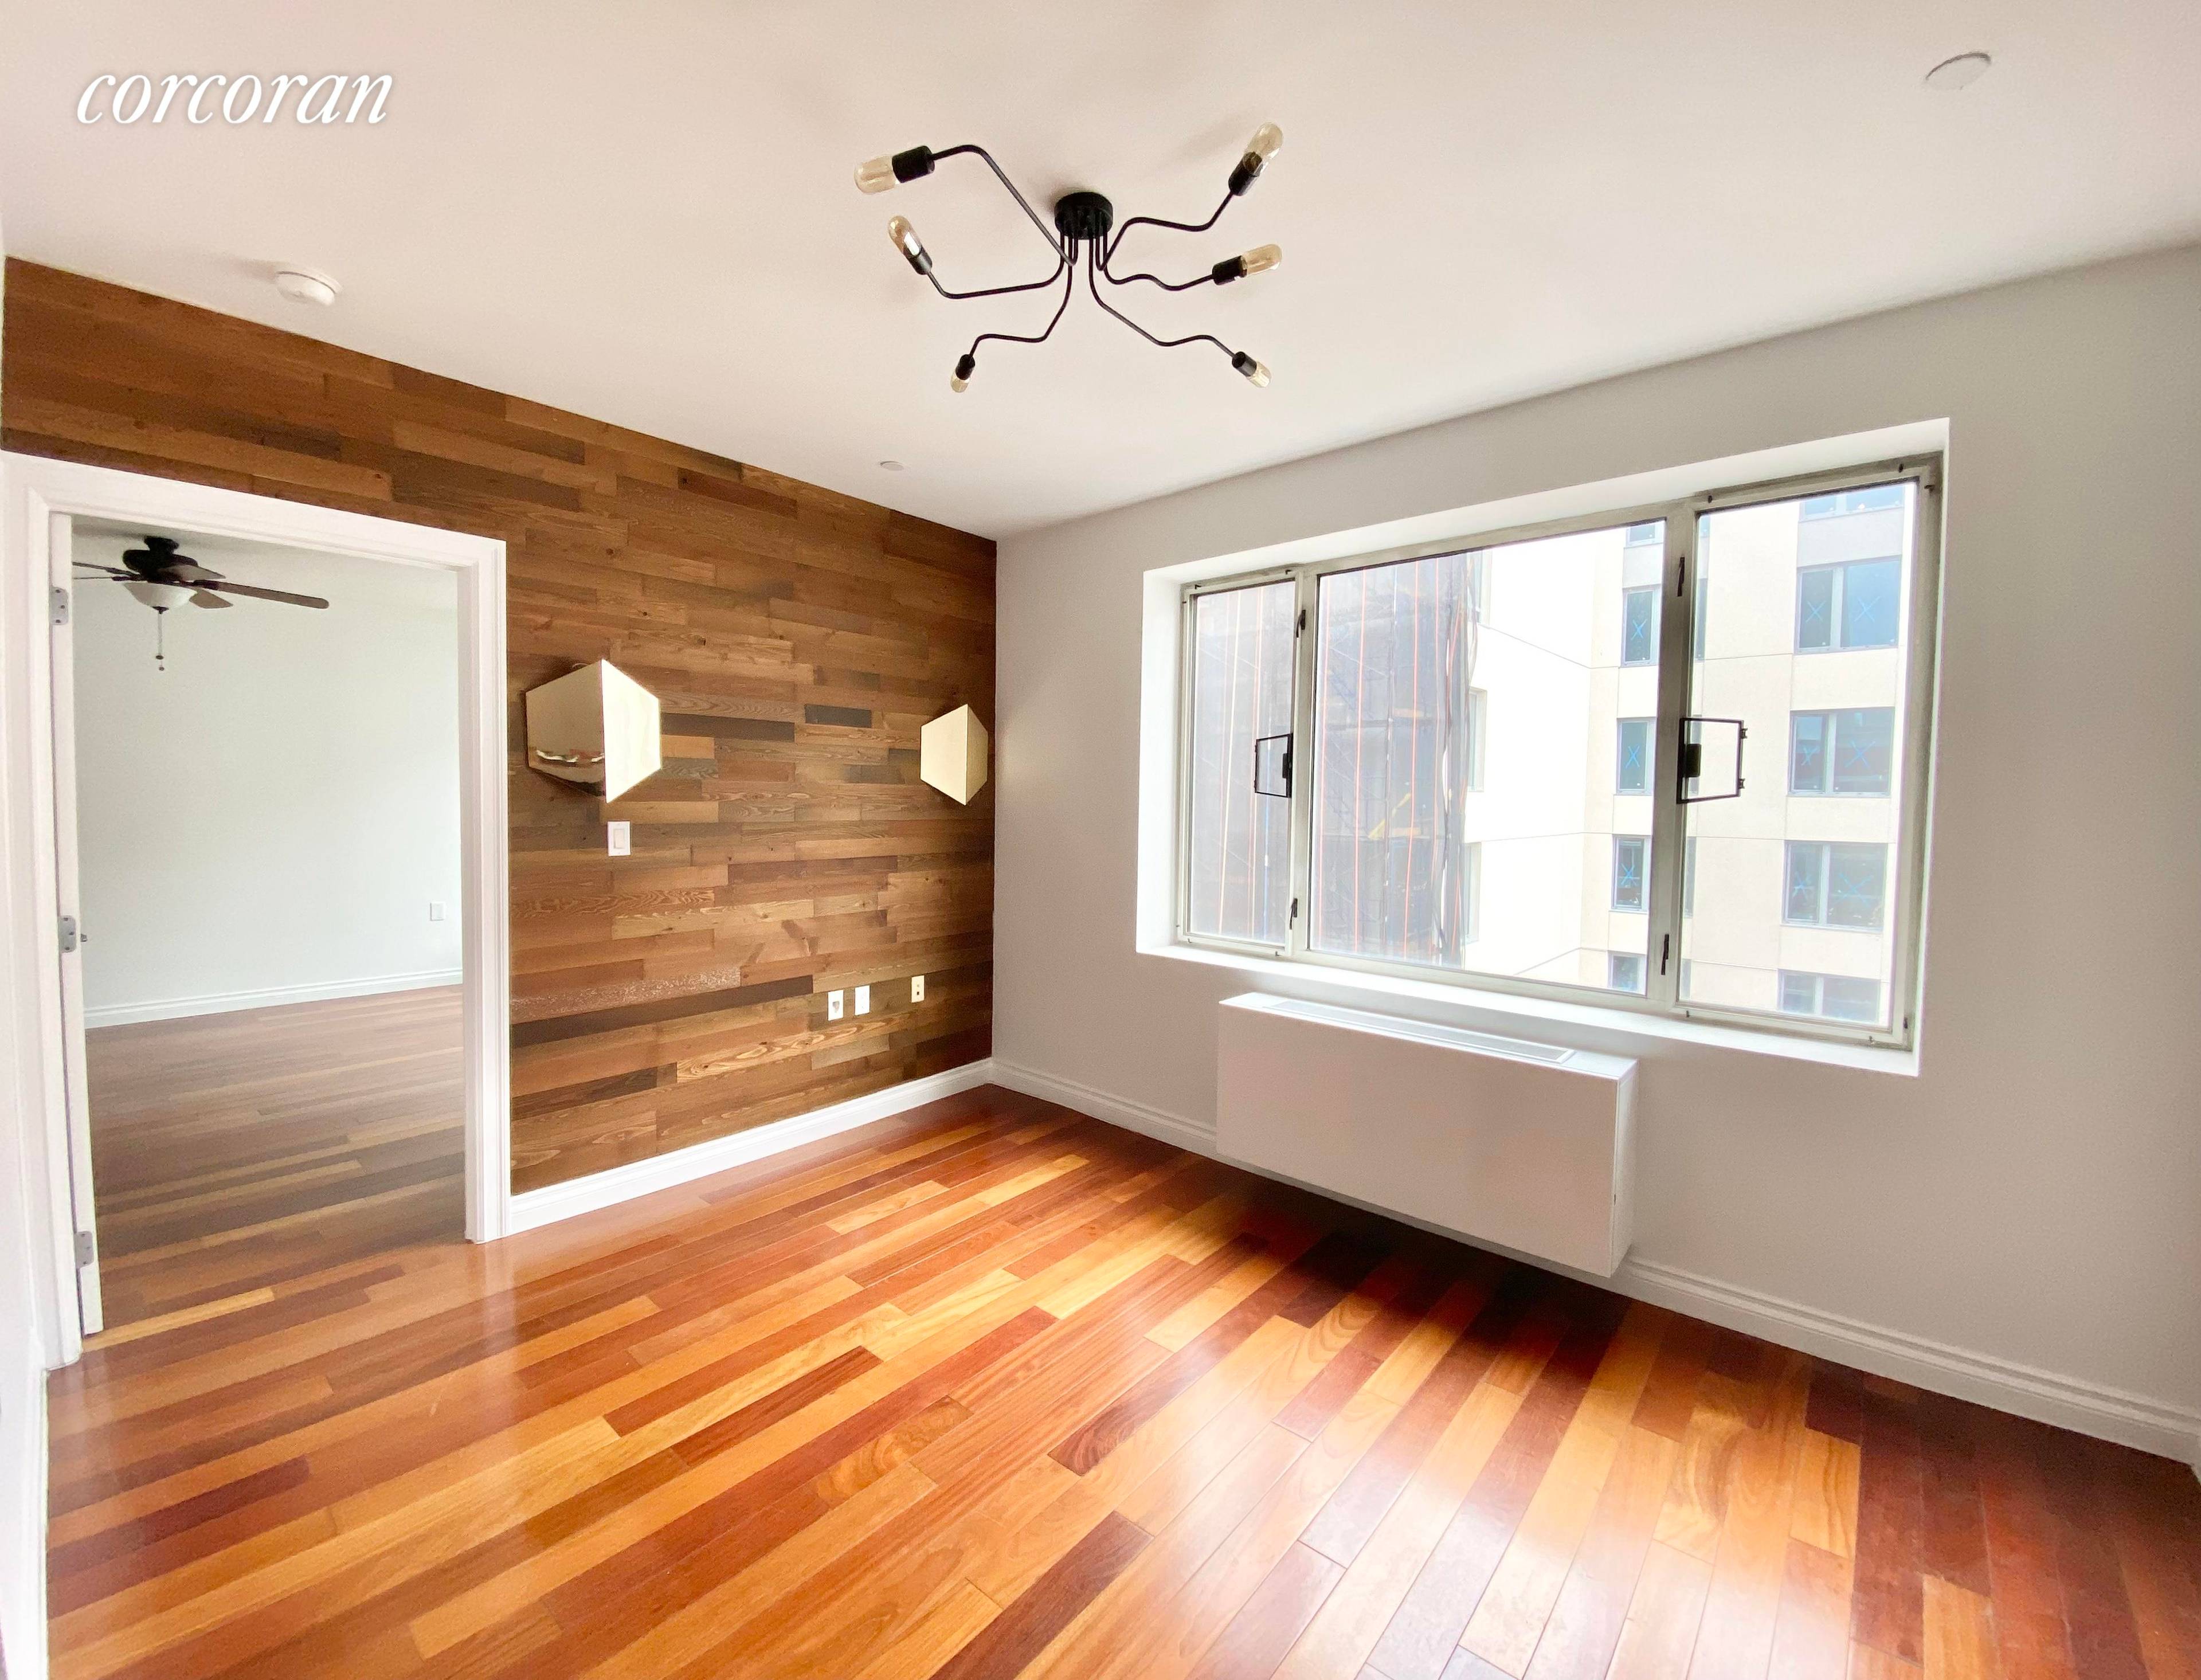 30 85 Vernon Blvd. 6K This spacious, bright and completely turnkey 2 Bedroom, 1.